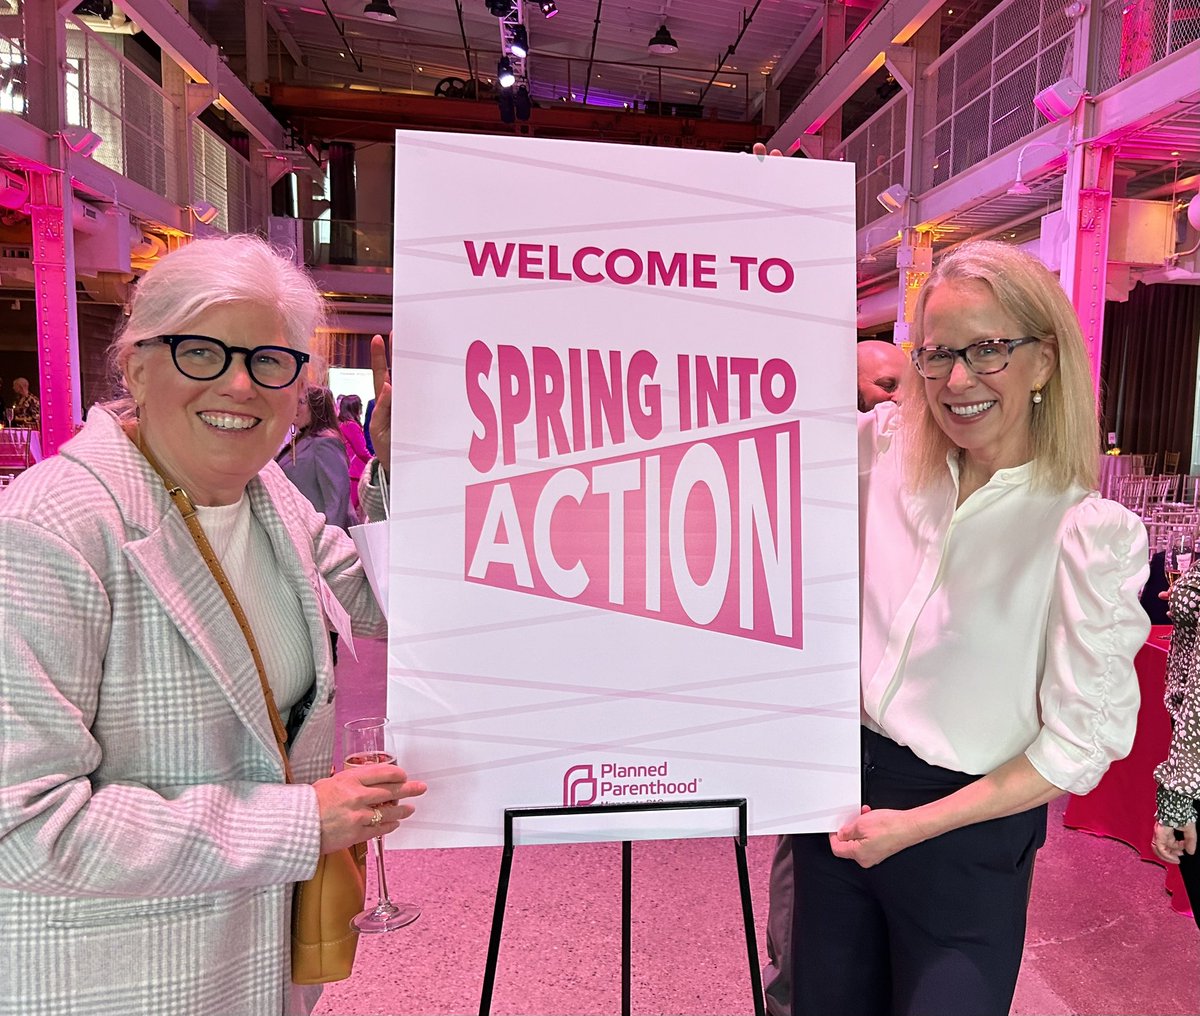 Inspiring night at the @ppmn spring event! Such an honor to meet Alexis McGill Johnson, President & CEO of @PPact and to see @ppmn superstars Ruth Richardson & Sarah Stoesz. We will stand together to protect our rights and freedoms in November!